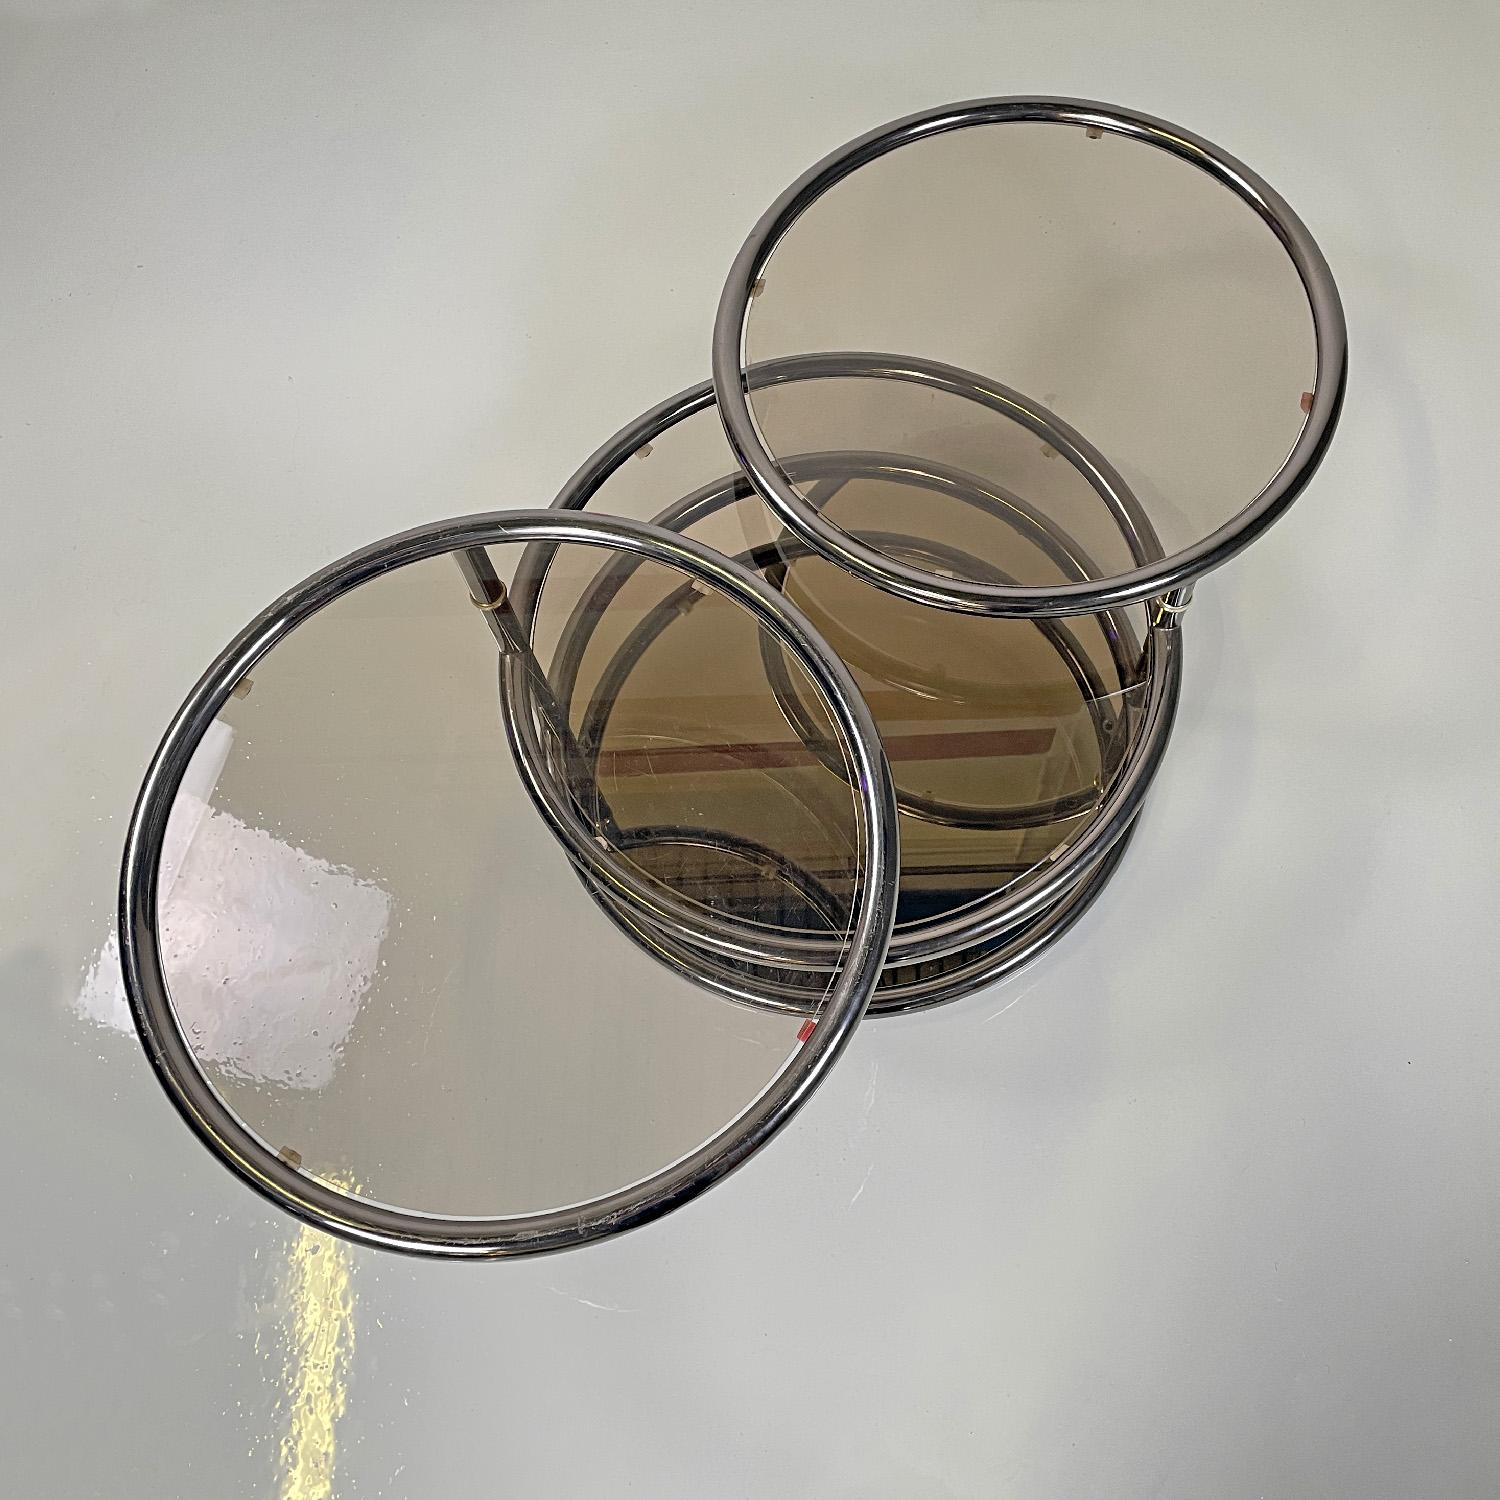 Italian modern coffee table in smoked glass and metal with swivel tops, 1970s For Sale 1